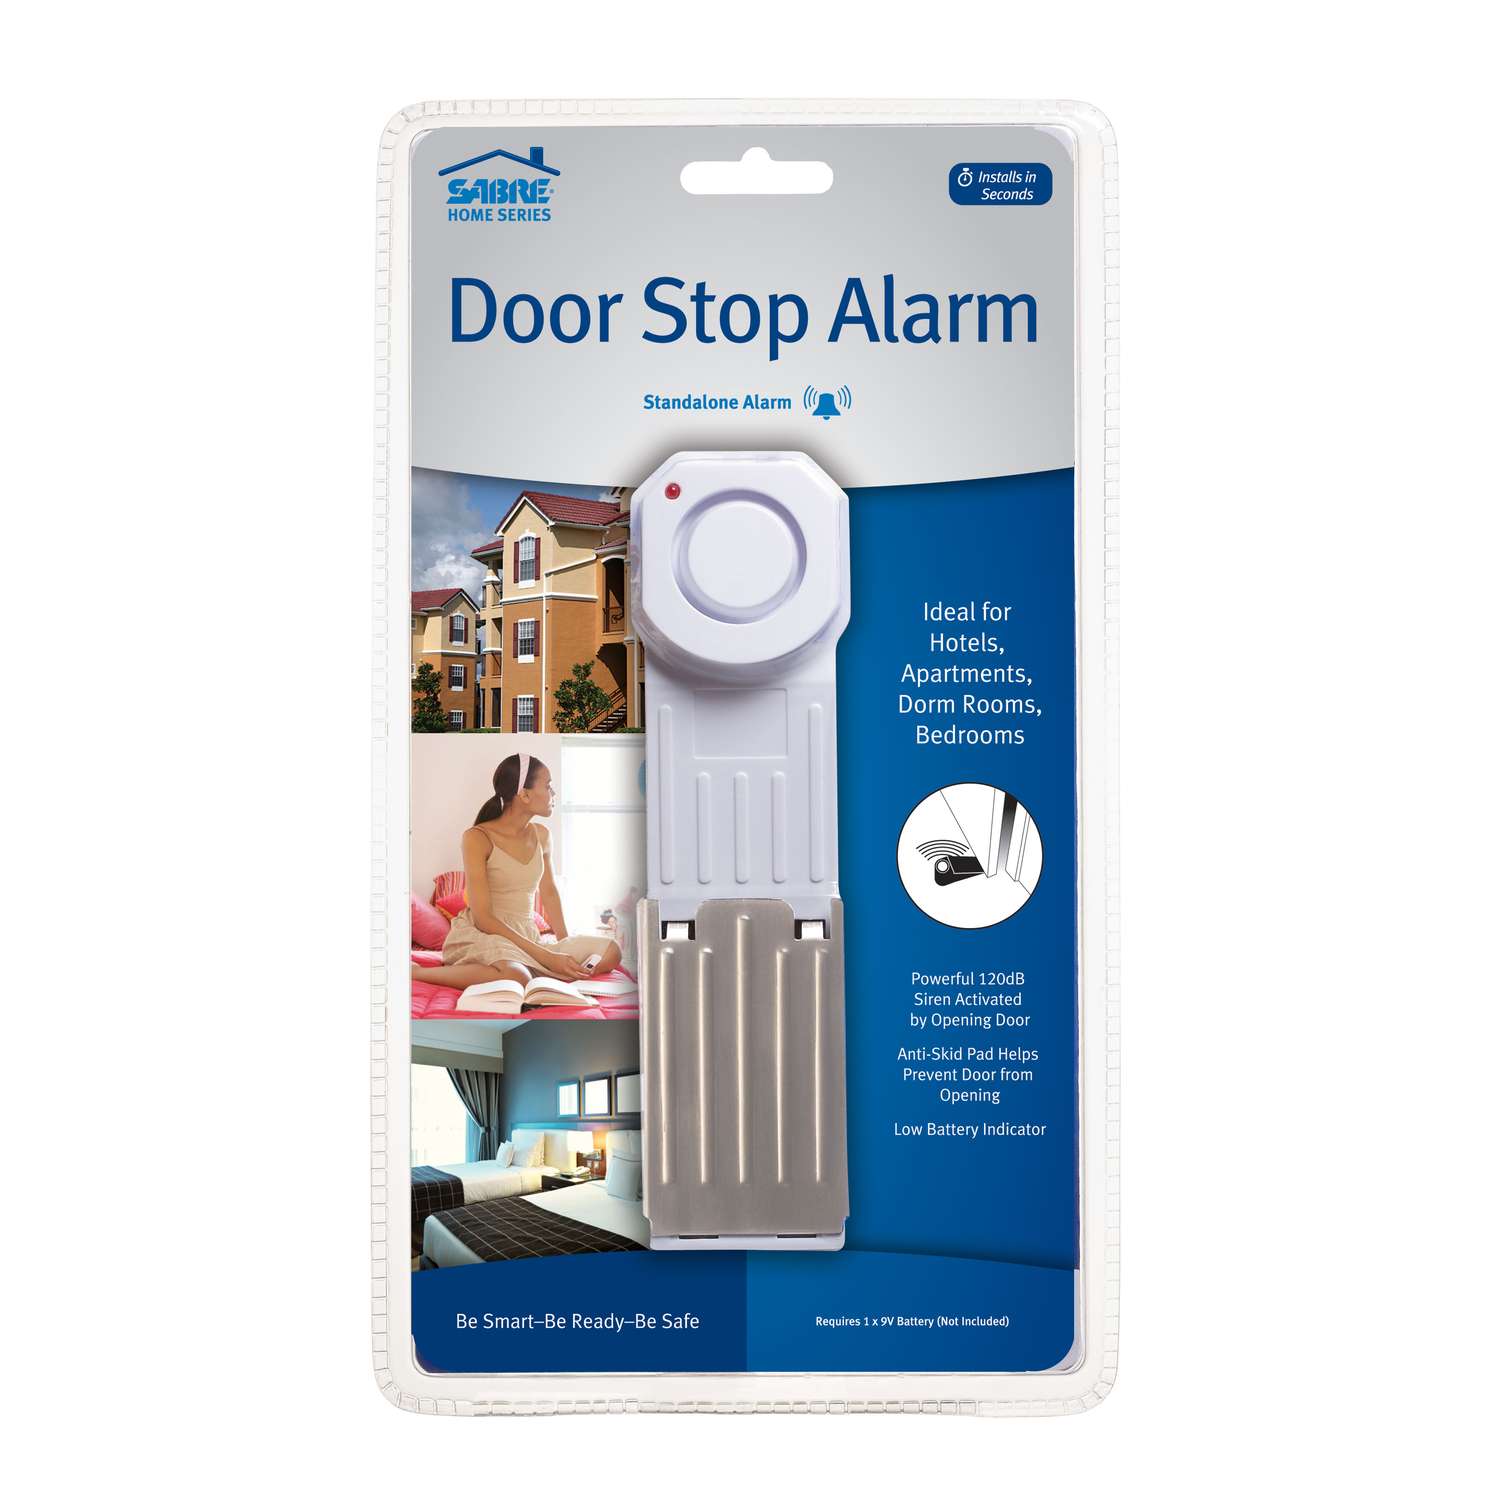 Alarm Hotels for Home Office Apartments Stainless Steel Sturdy ABS Plastic Material Burglar Alert POCREATION Door Stop Security Alarm 